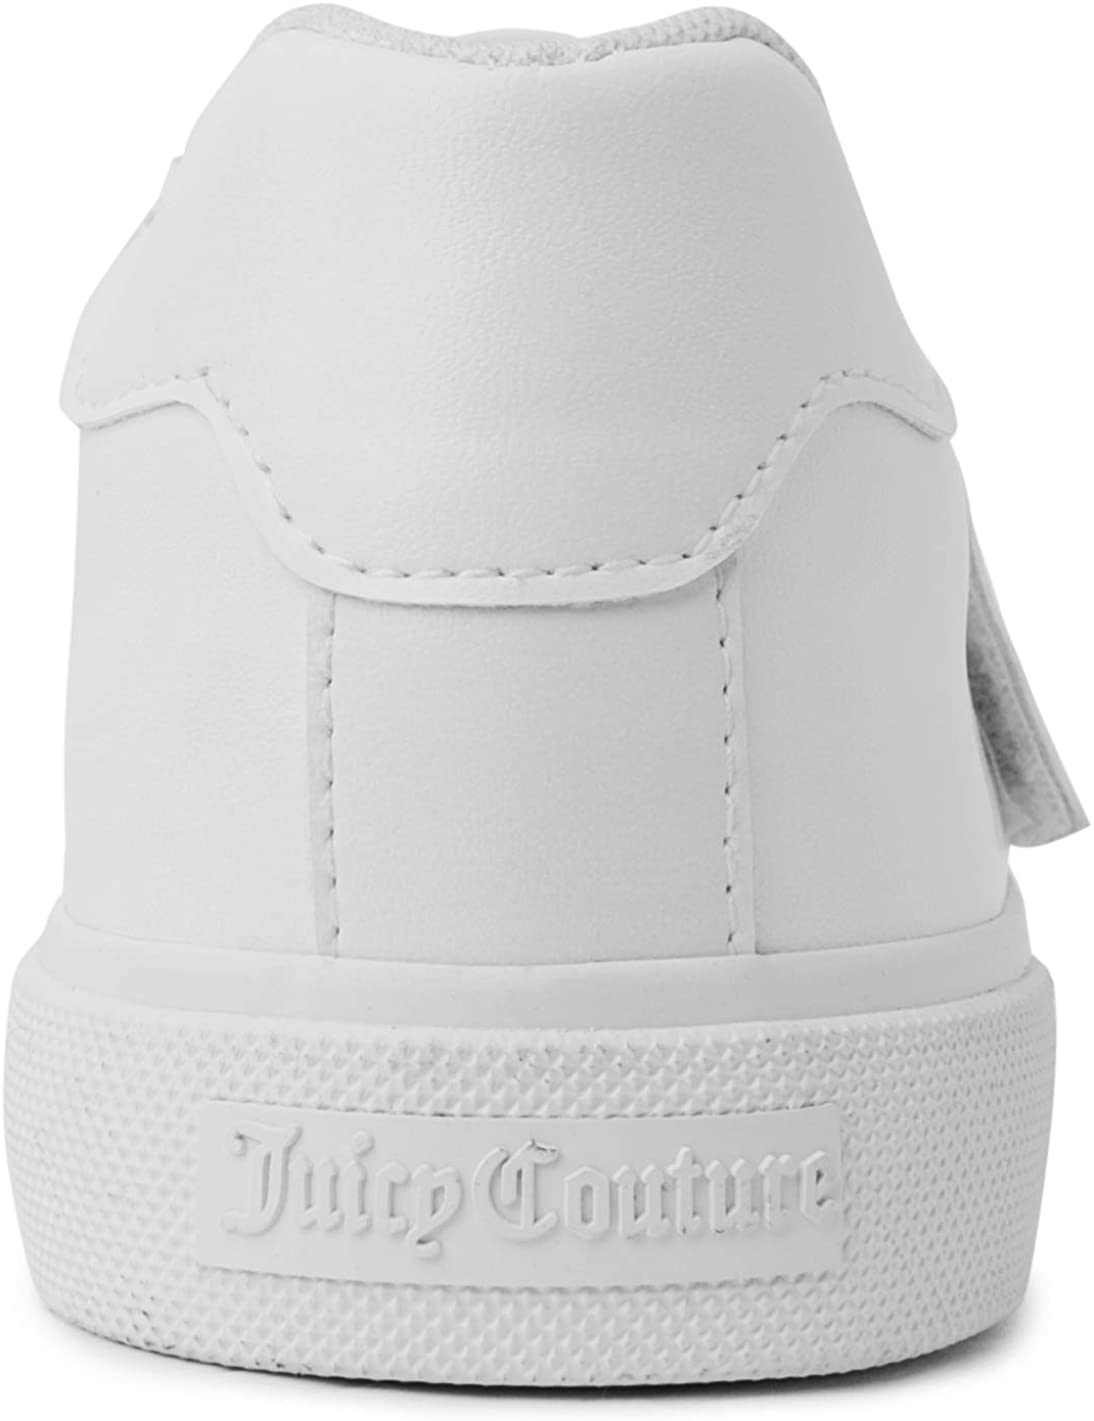 Juicy Couture Women Fashion Sneaker Womens Casual Shoes Platform Tennis Shoes All White, Chunky Sneakers, Walking Shoes - image 5 of 7